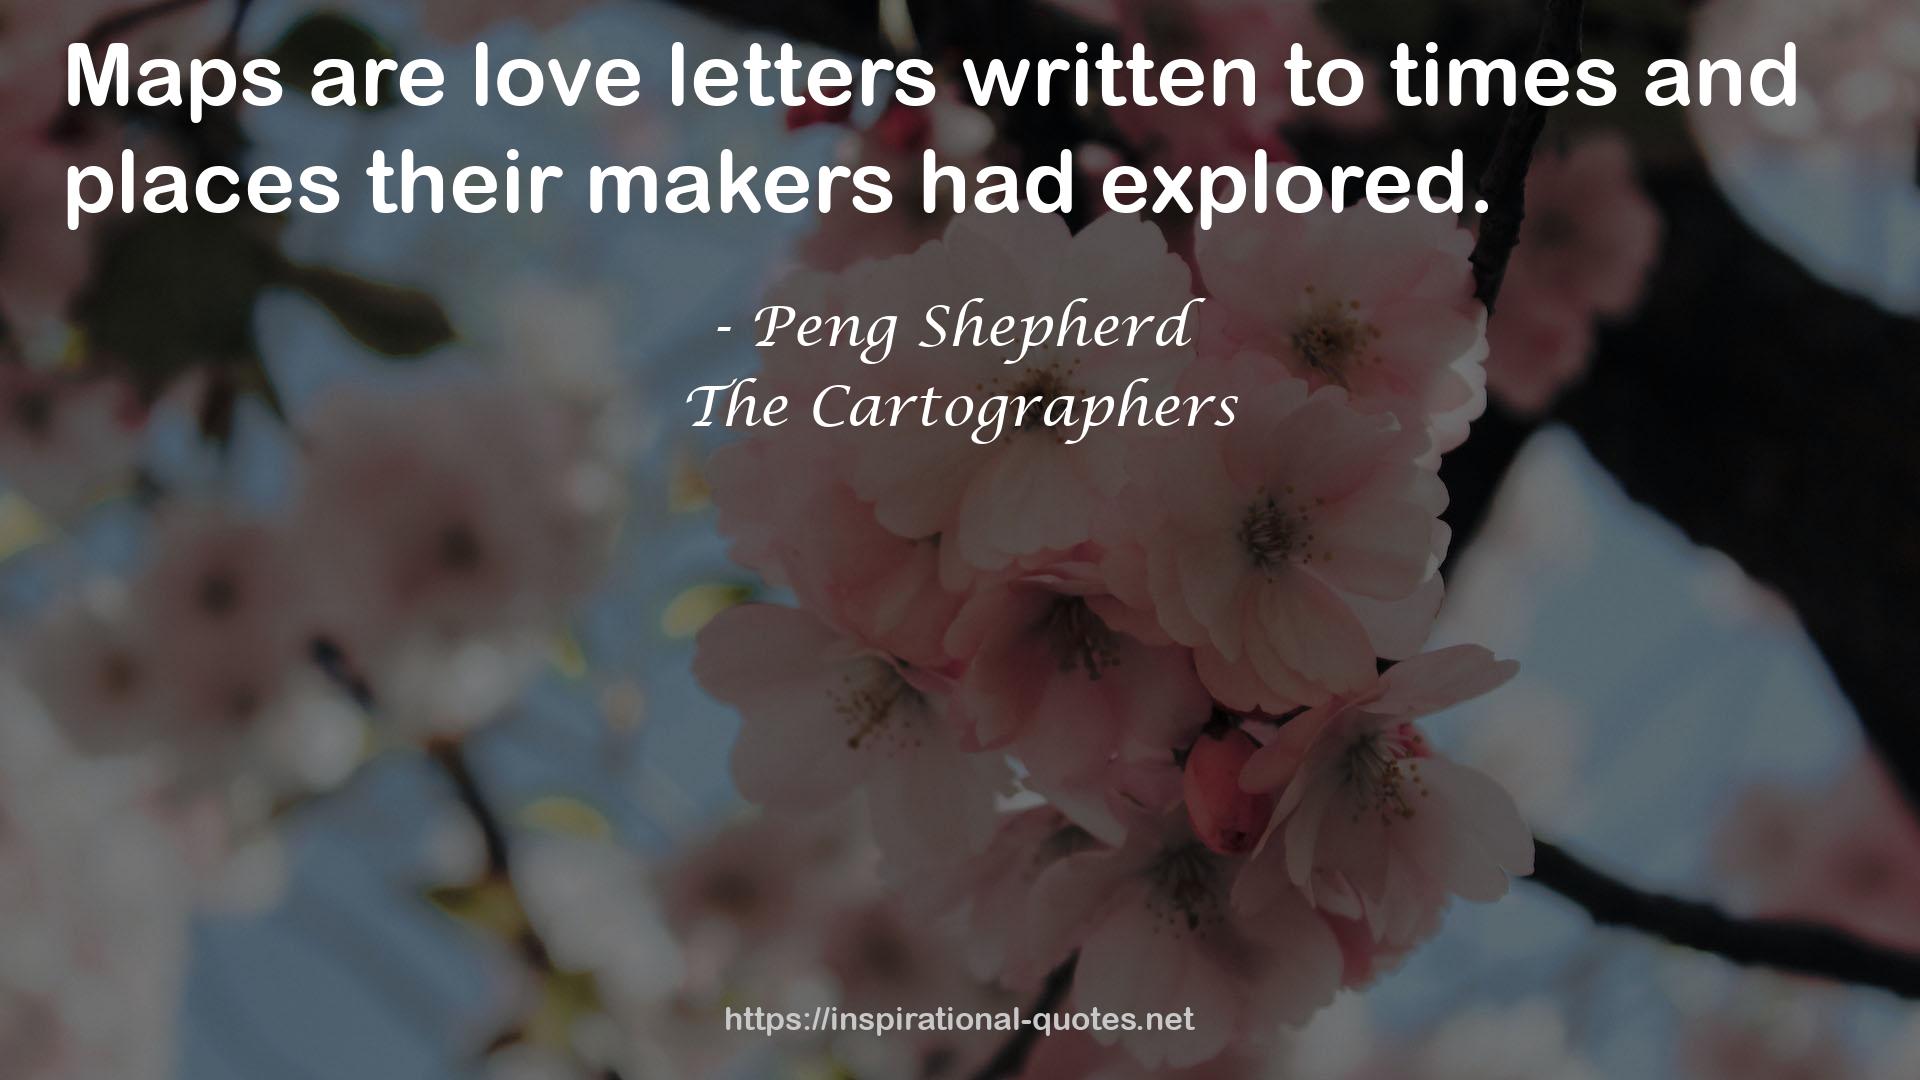 The Cartographers QUOTES